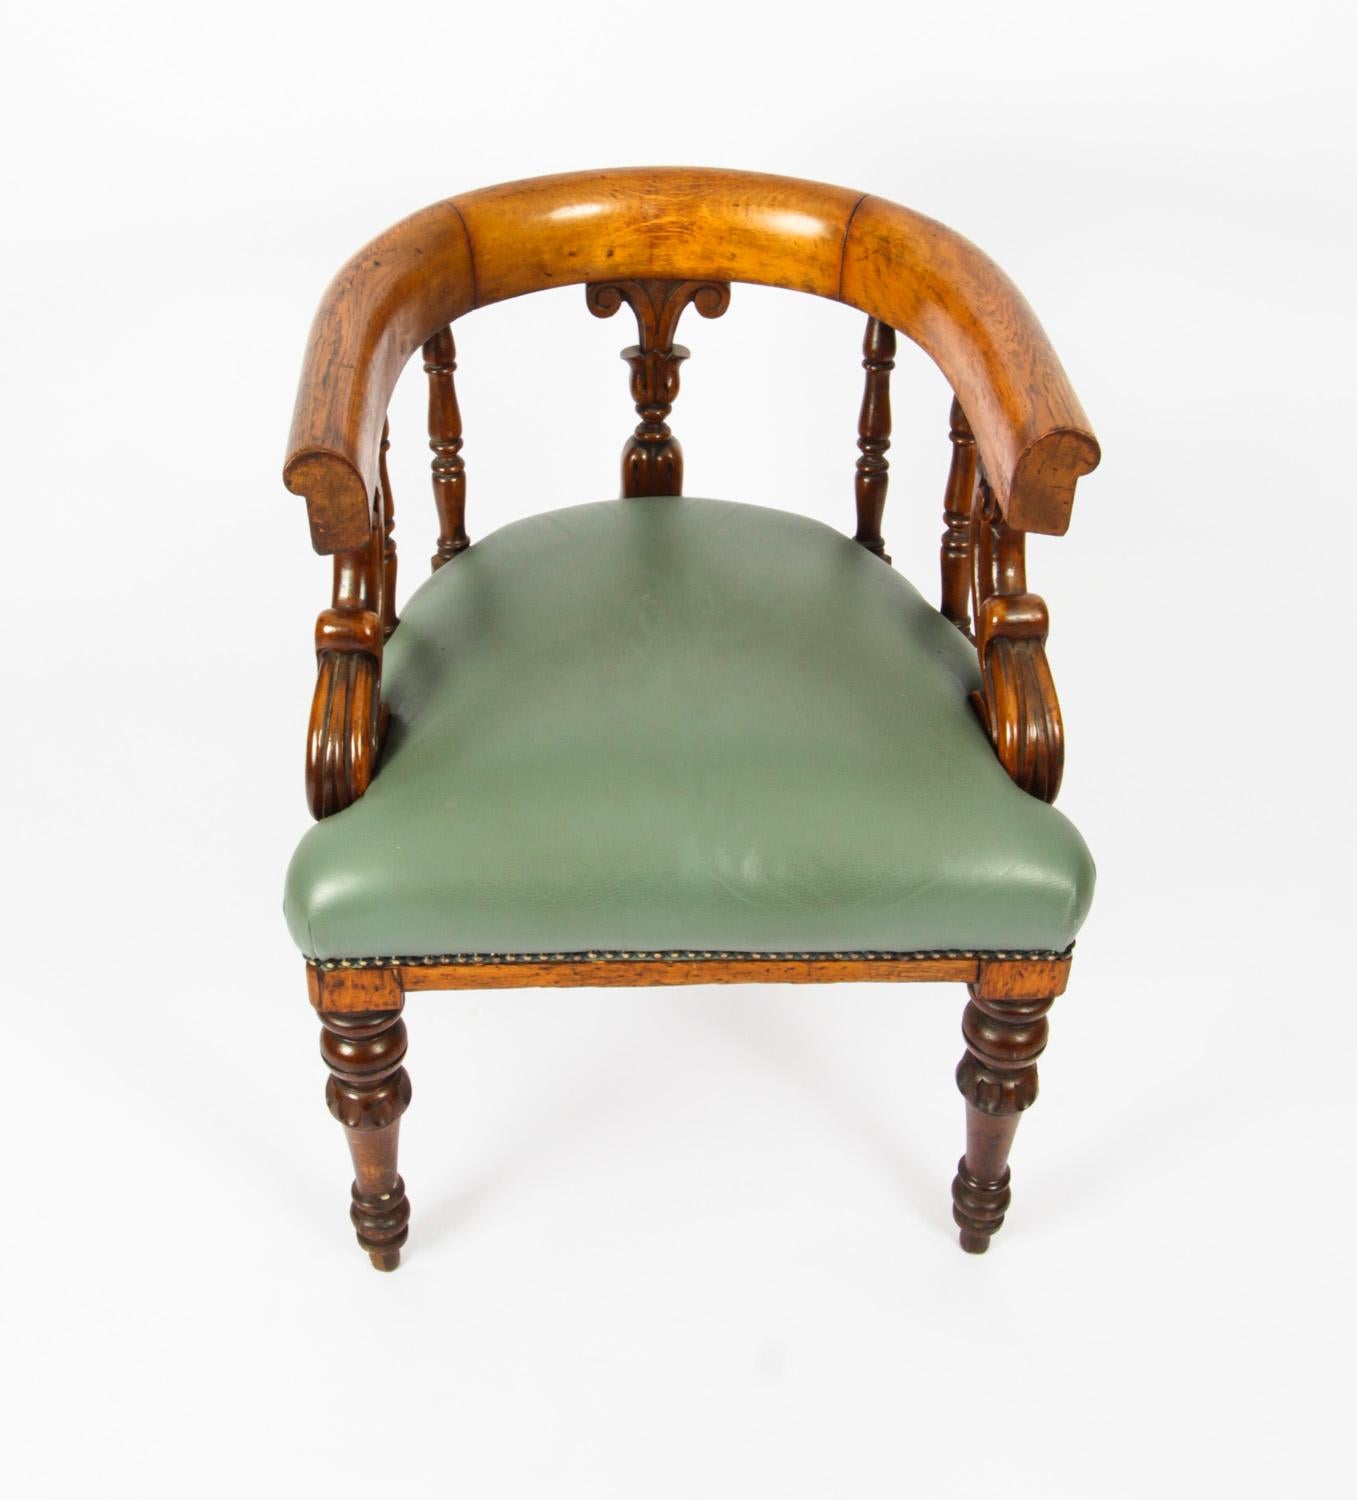 This is an absolutely fabulous pair of antique Victorian Mahogany library armchairs, circa 1860 in date.

The chairs have been recently reupholstered in close-nailed leather, one in red, the other in green and feature curved back supports above